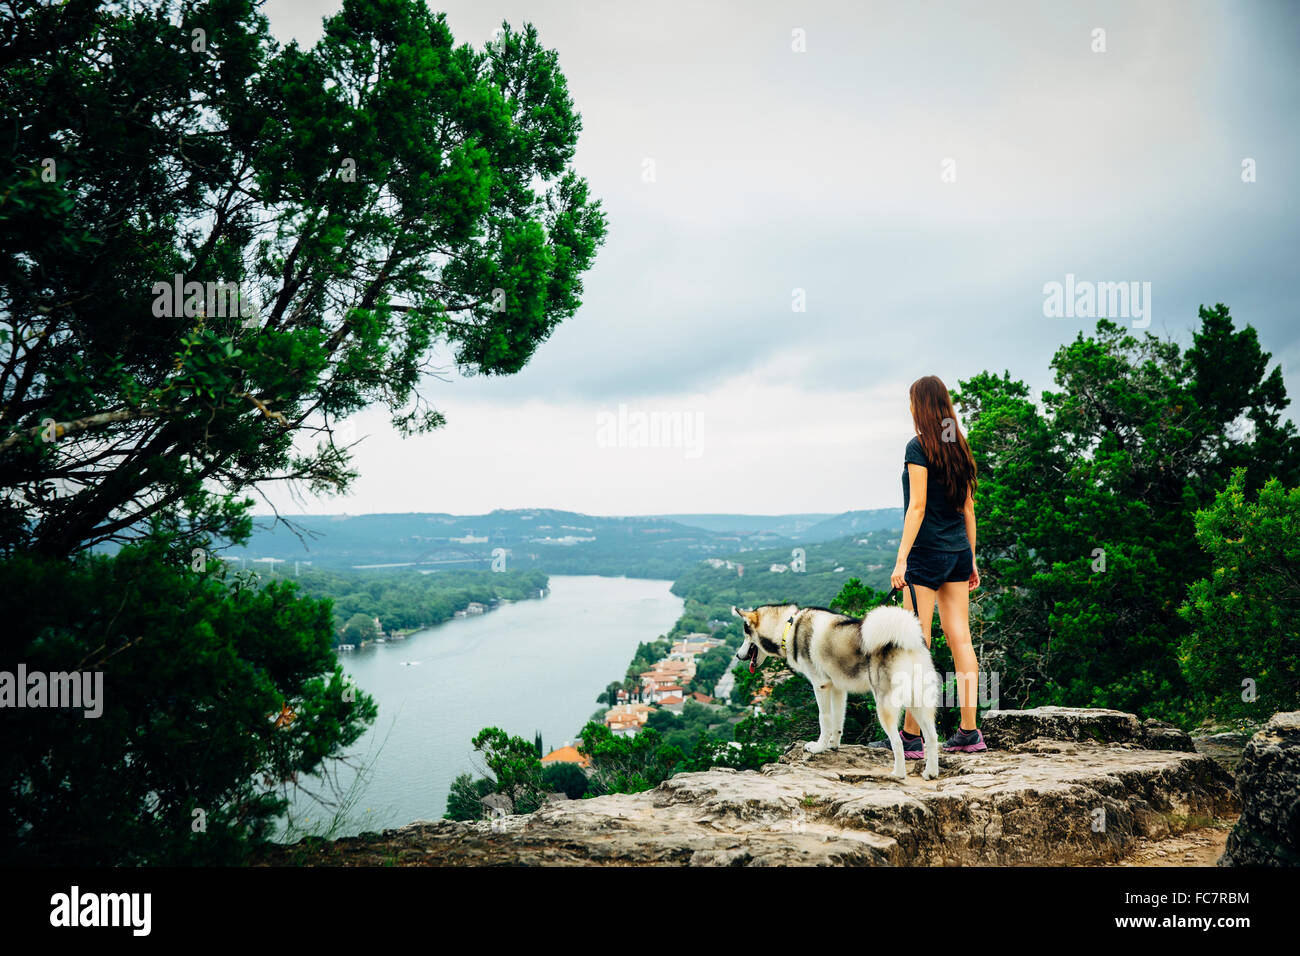 Caucasian woman and dog admiring scenic view Stock Photo